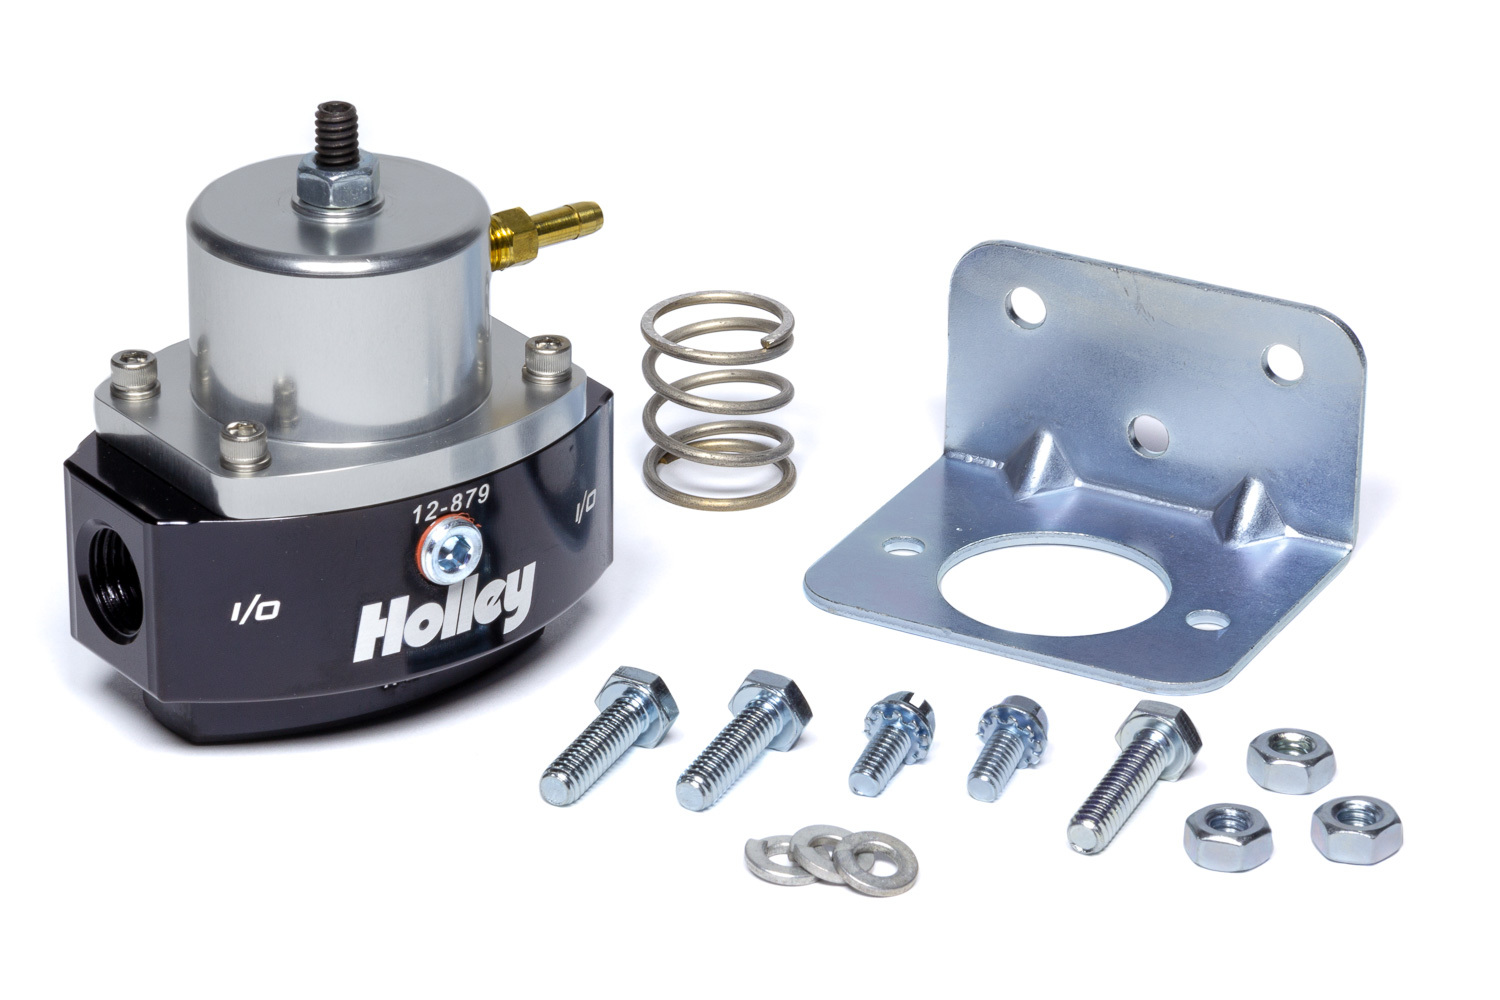 Holley 12-879 Fuel Pressure Regulator, HP Billet, 4 to 65 psi, In-Line, 3/8 in NPT Inlet, 3/8 in NPT Outlet, 3/8 in NPT Return, 1/8 in NPT Port, Bypass, Aluminum, Black / Clear Anodized, Diesel / E85 / Gas, Each